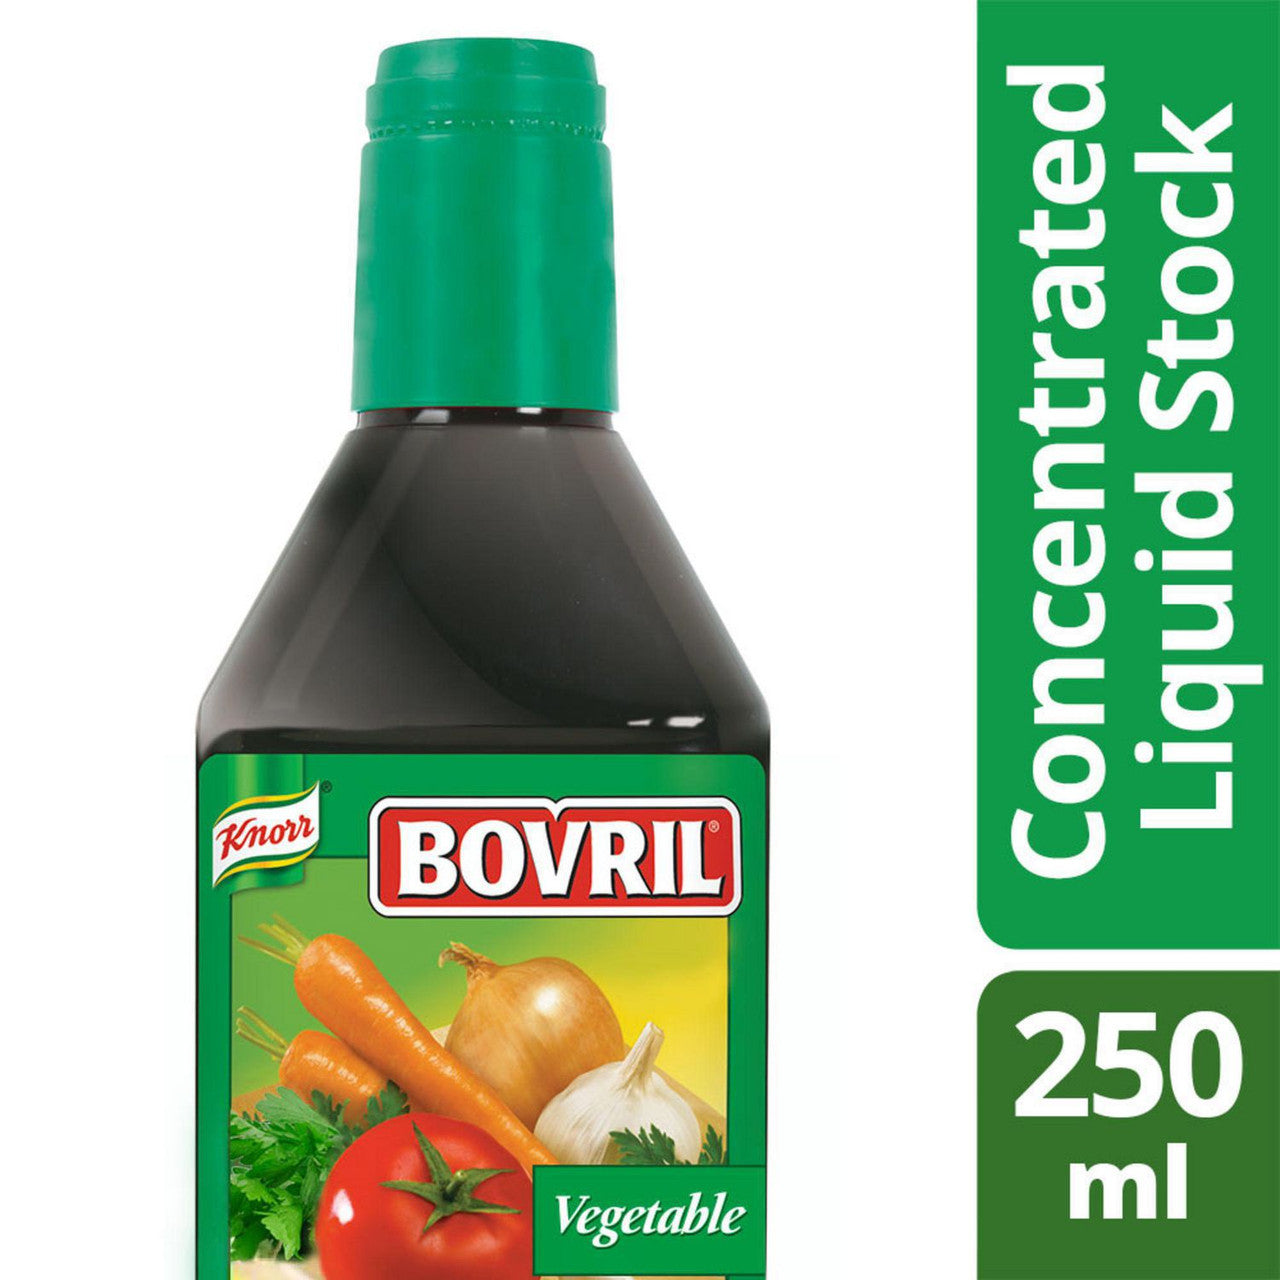 Knorr Bovril Vegetable Concentrated Liquid Stock, 250mL/8.45 fl.oz, (Imported from Canada)